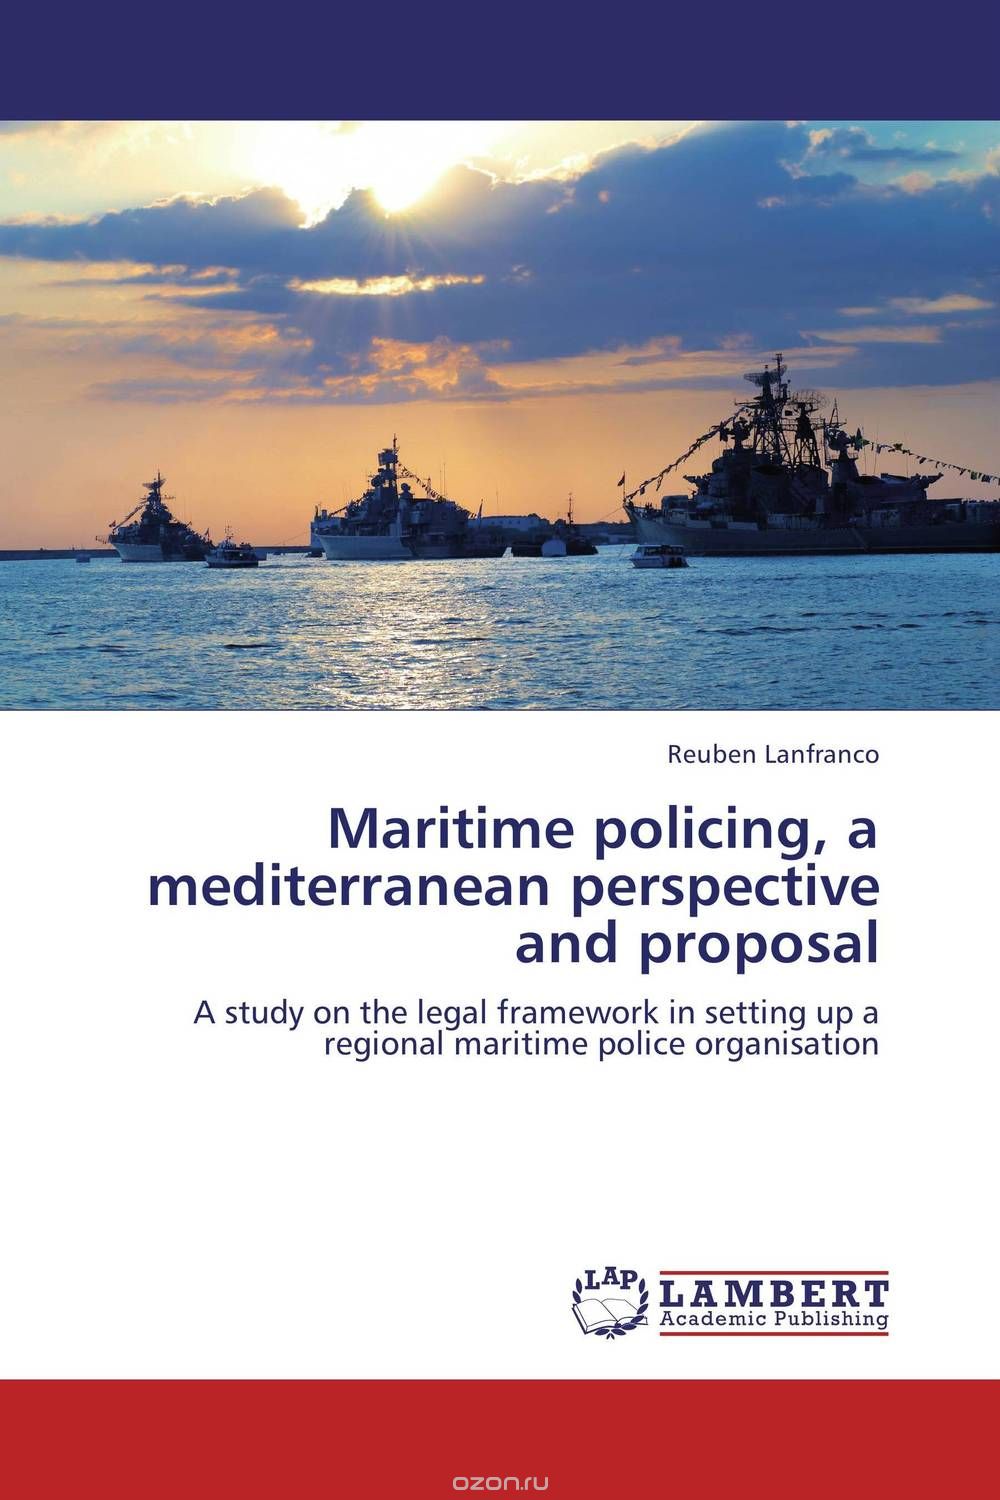 Maritime policing, a mediterranean perspective and proposal